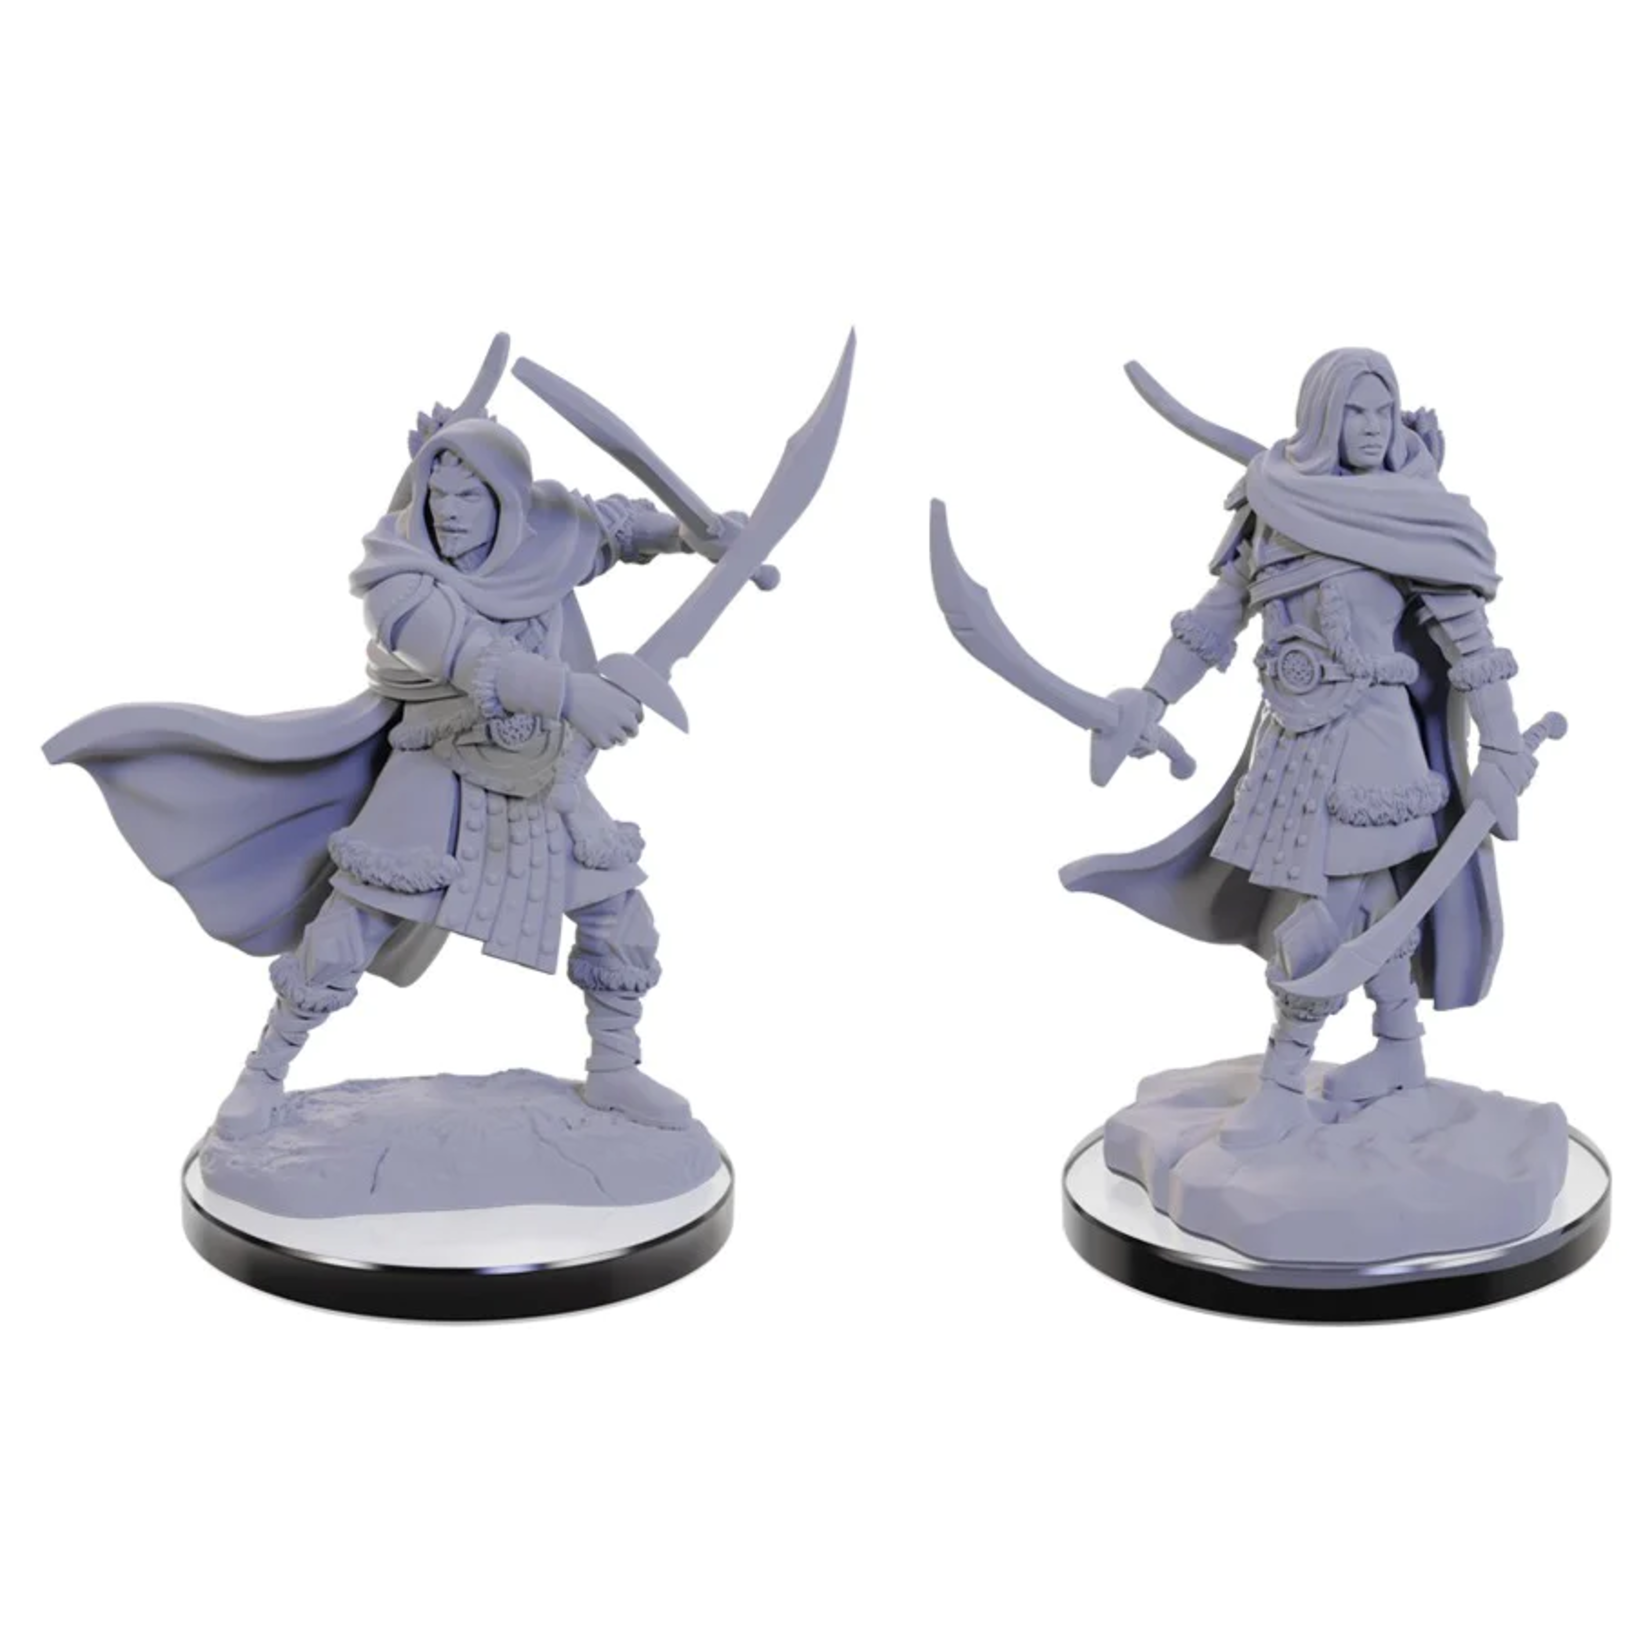 WizKids Dungeons and Dragons Nolzur's Marvelous Minis Human Rangers